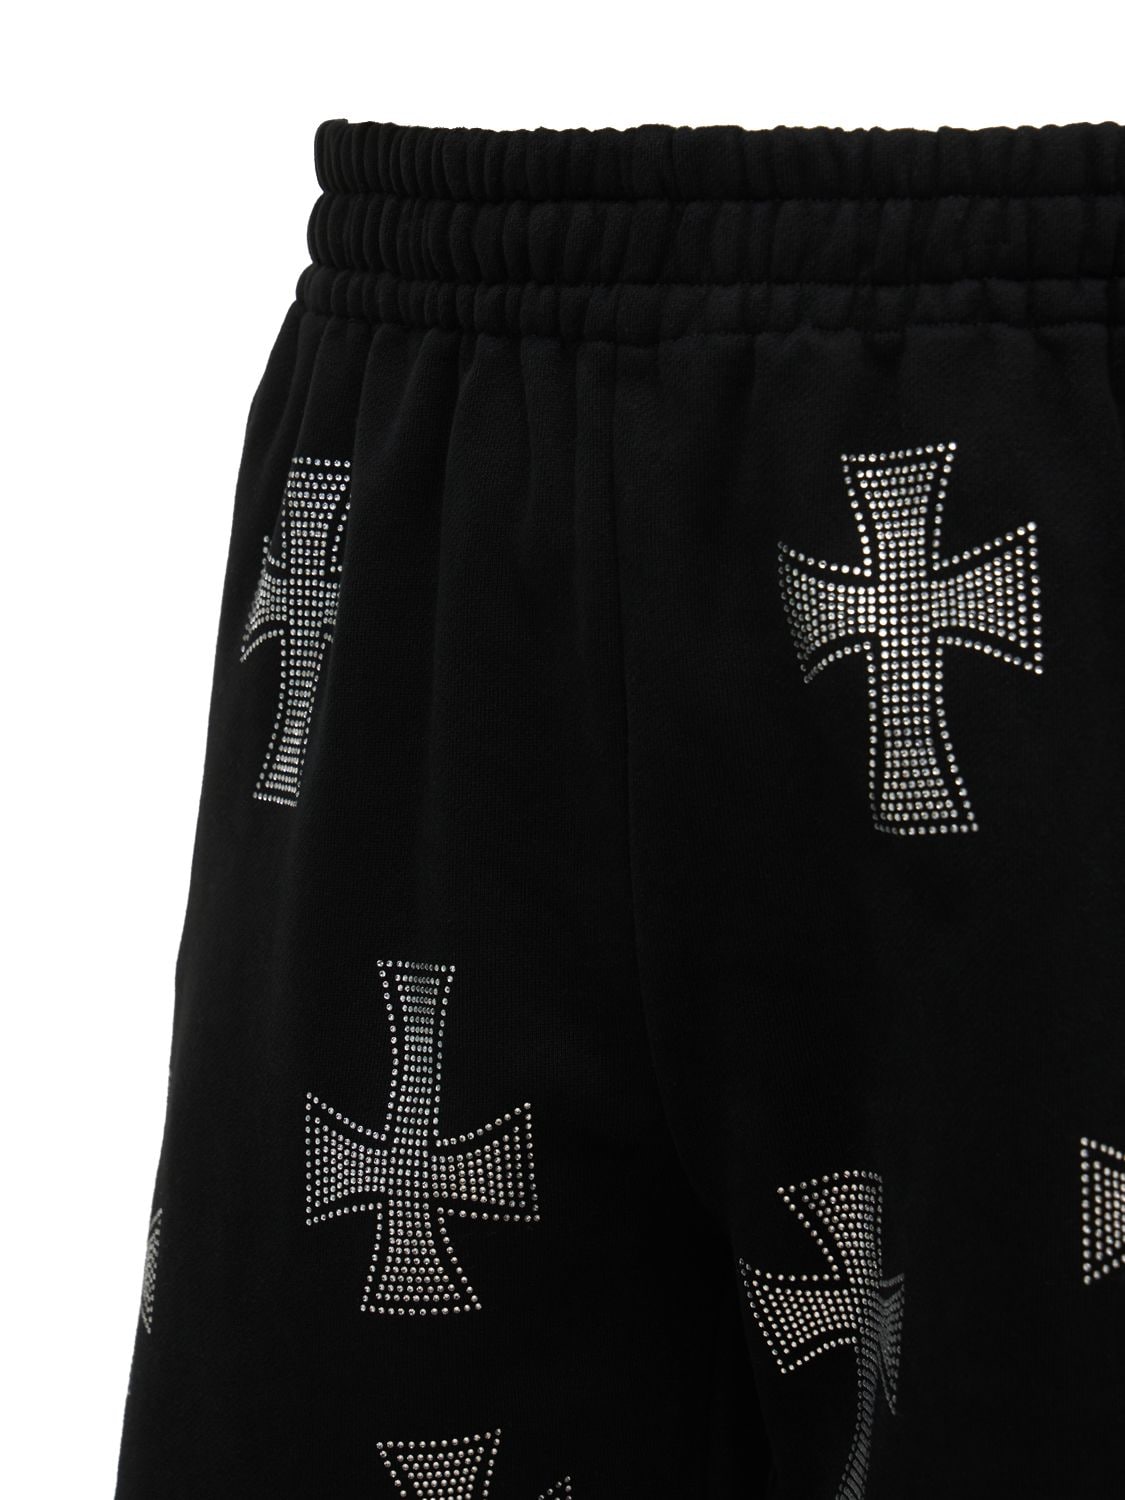 Crystal Cross Cotton Shorts In Black